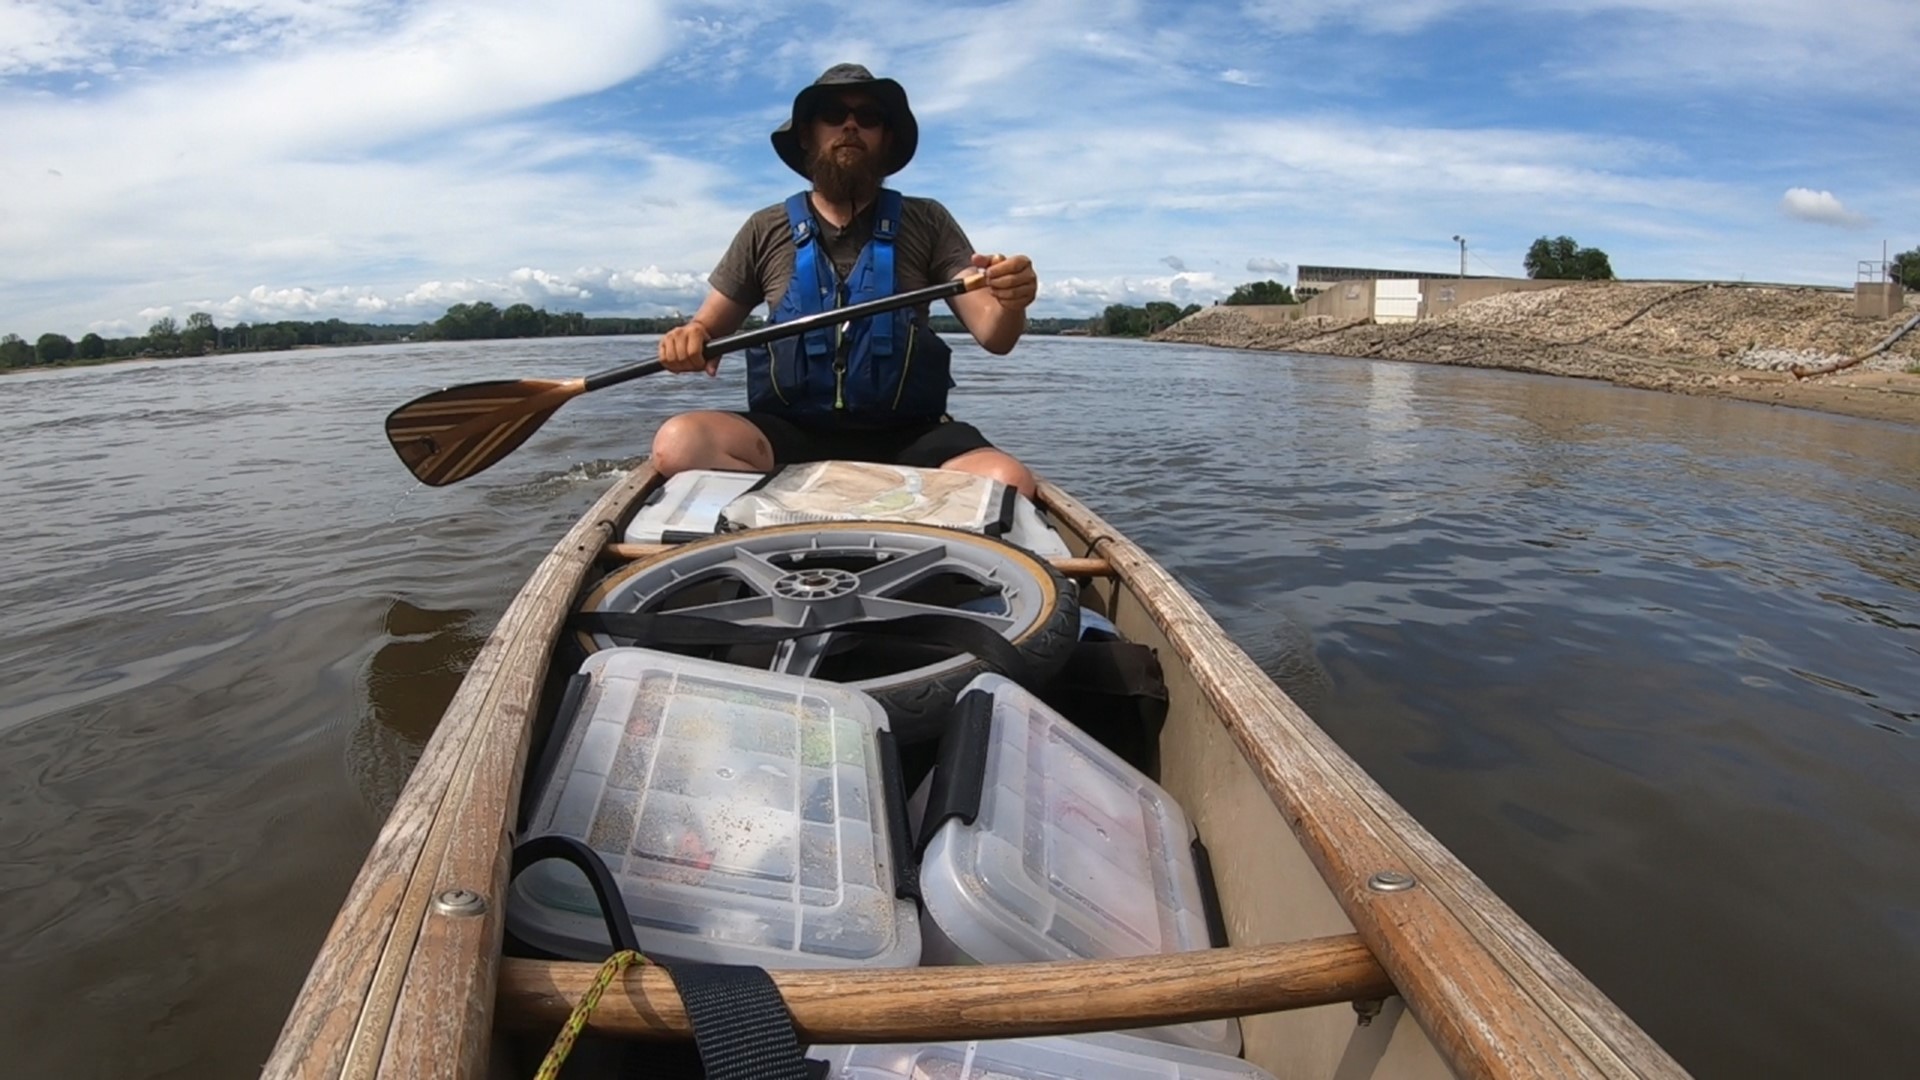 Robin Garwood started his canoe journey down the river May 30 and passed through the Quad Cities on July 7.